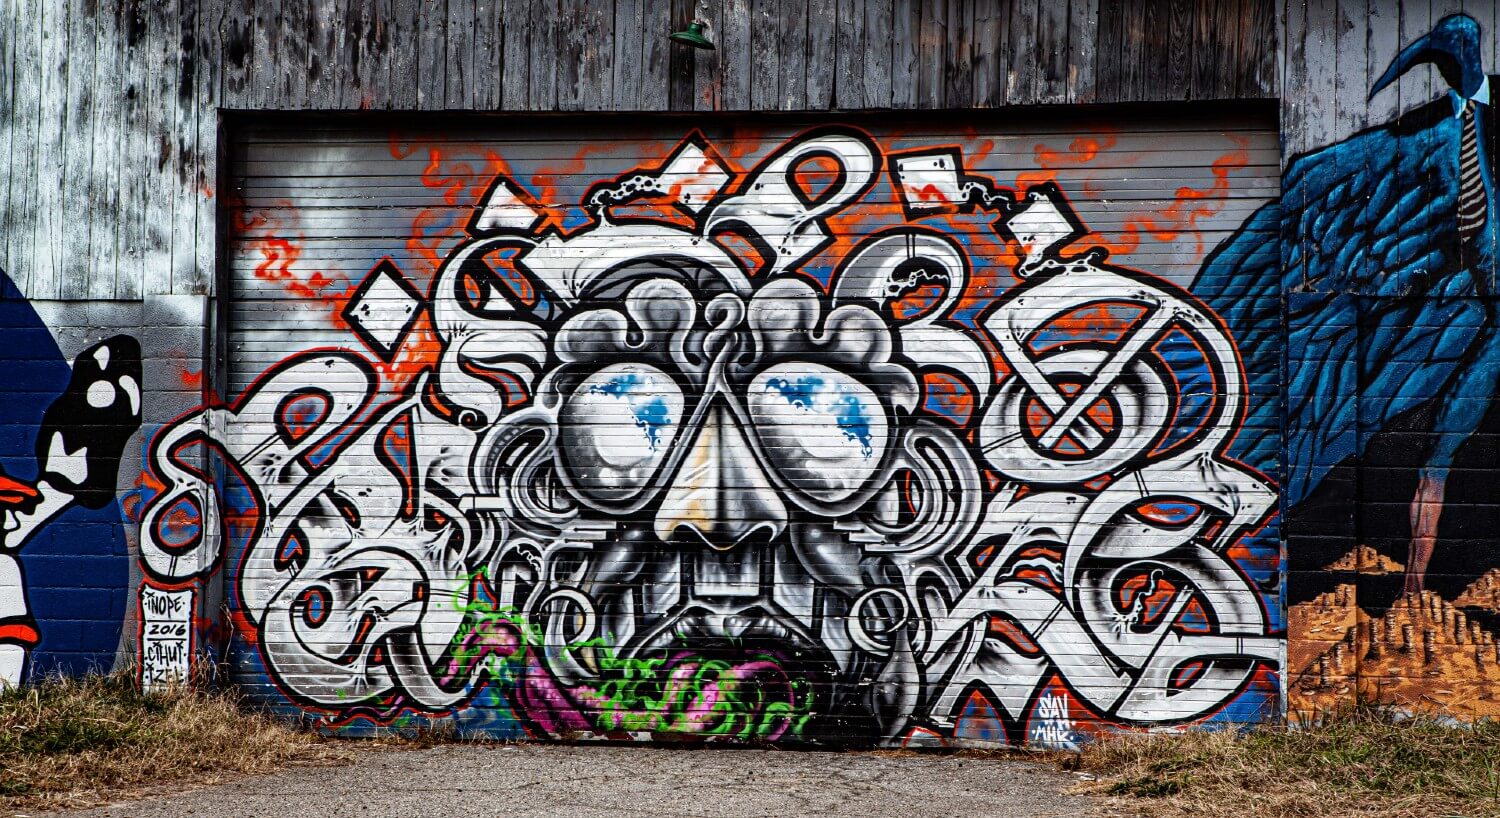 Garage door of a wooden building with mural drawn in graffiti-style